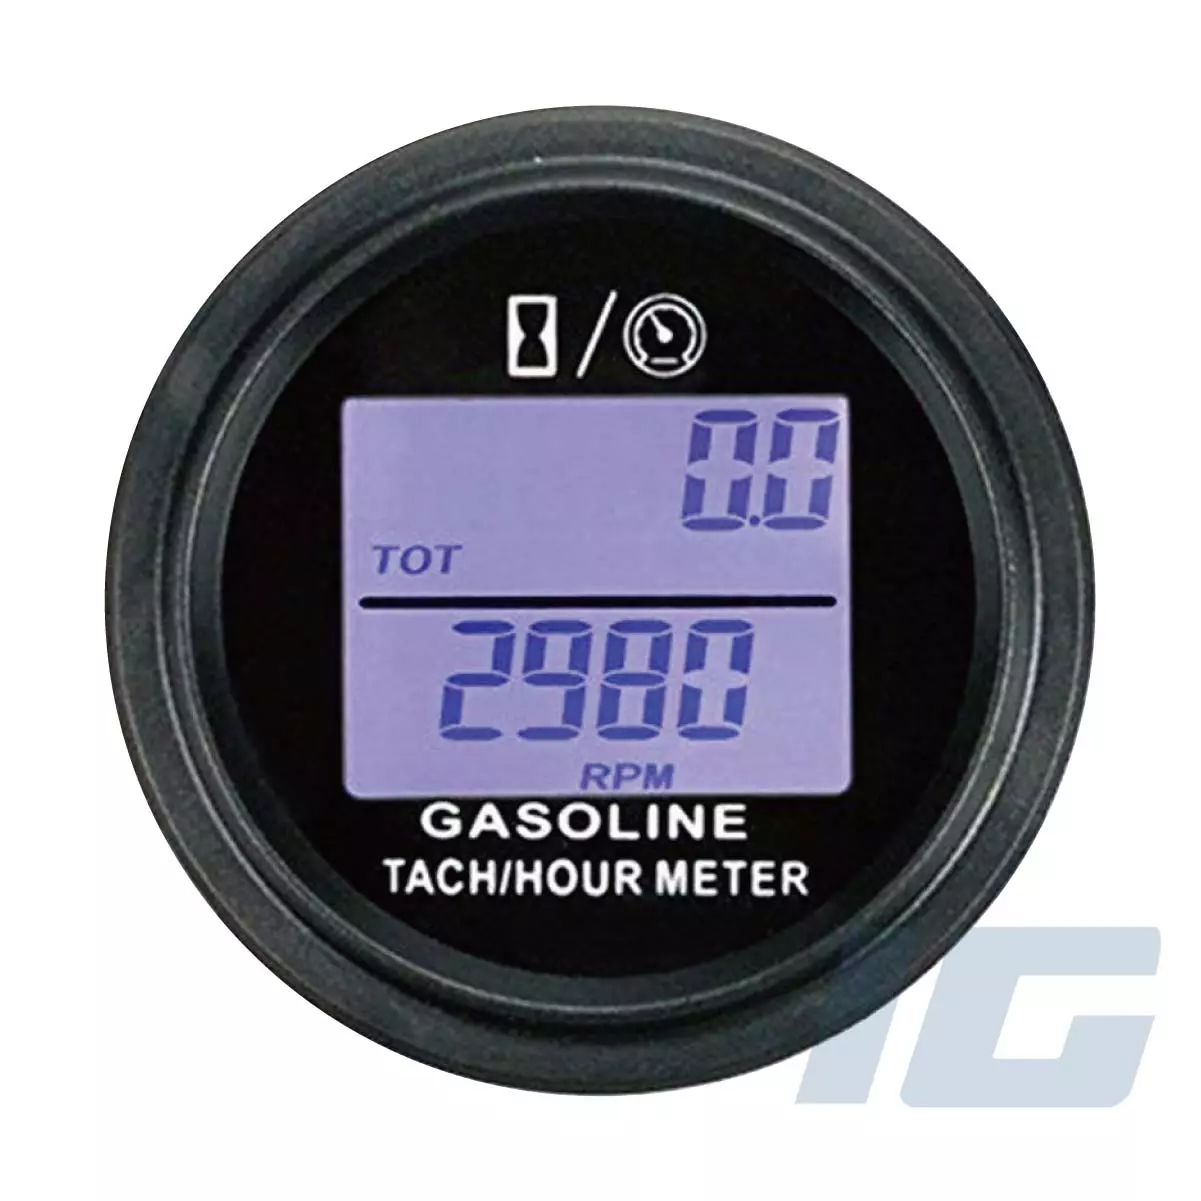 Inductive Tach / Hour Meter Round Type for Generator, Genset, Small Engine Meter Gauges for generator, genset, small engine, lawn mower, generating set, diesel. industrial automation with sensor